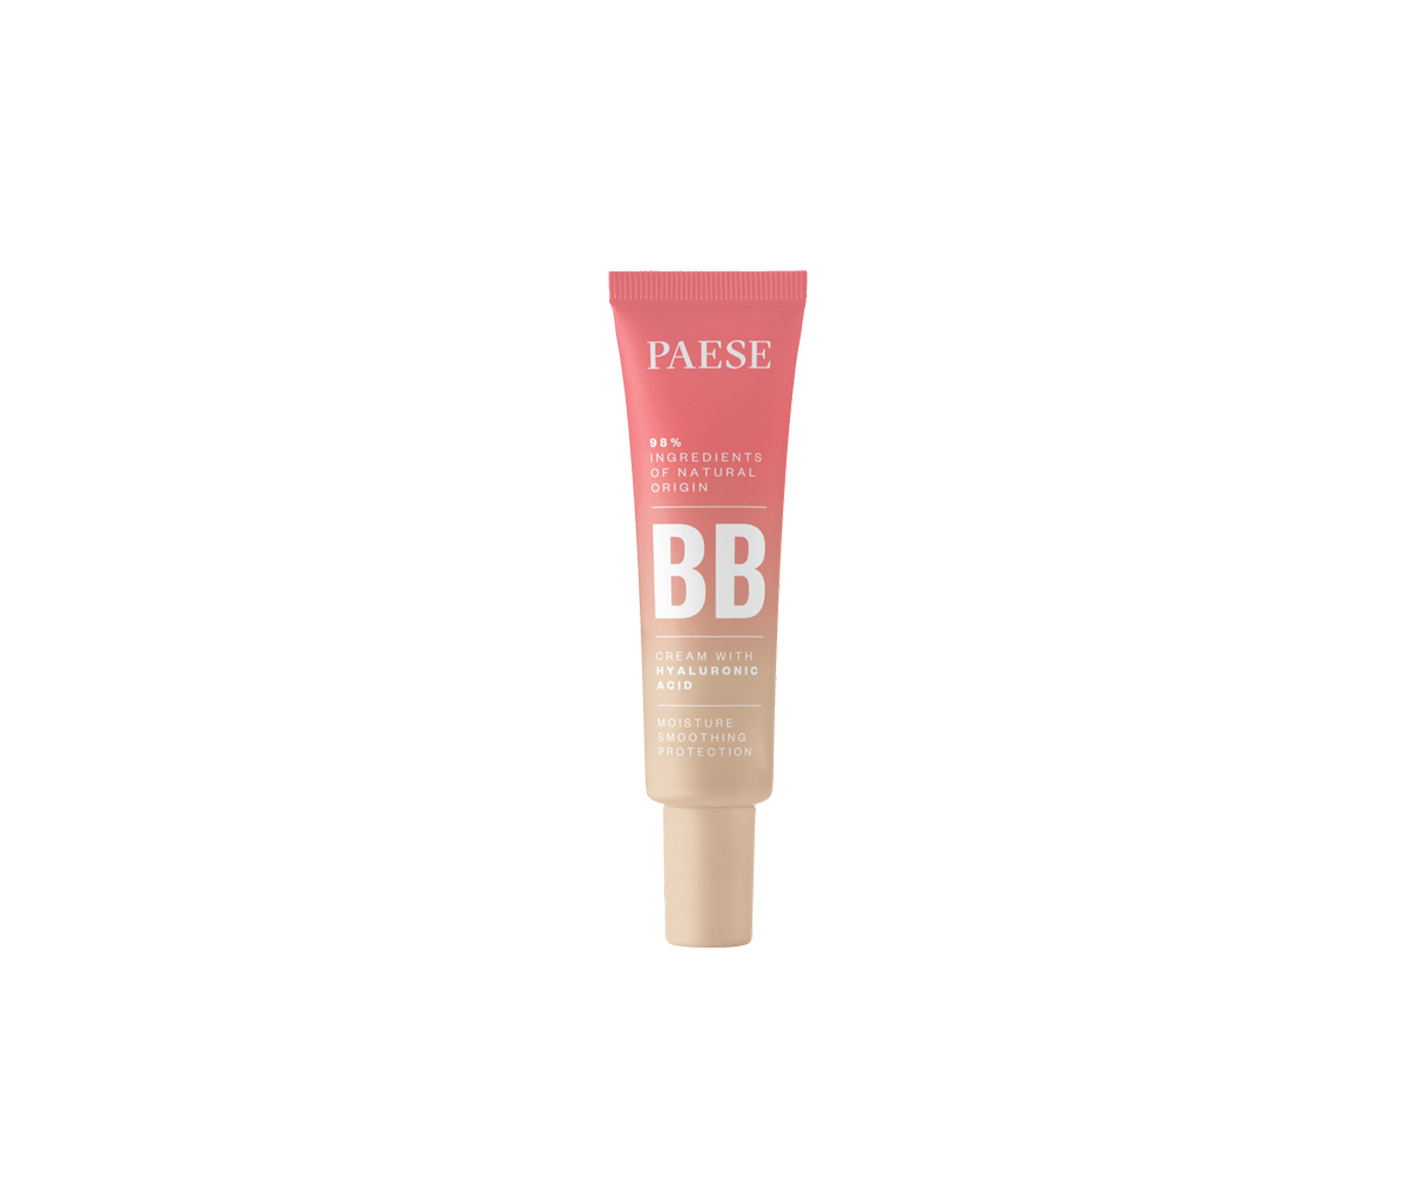 Paese, BB Cream with hyaluronic acid